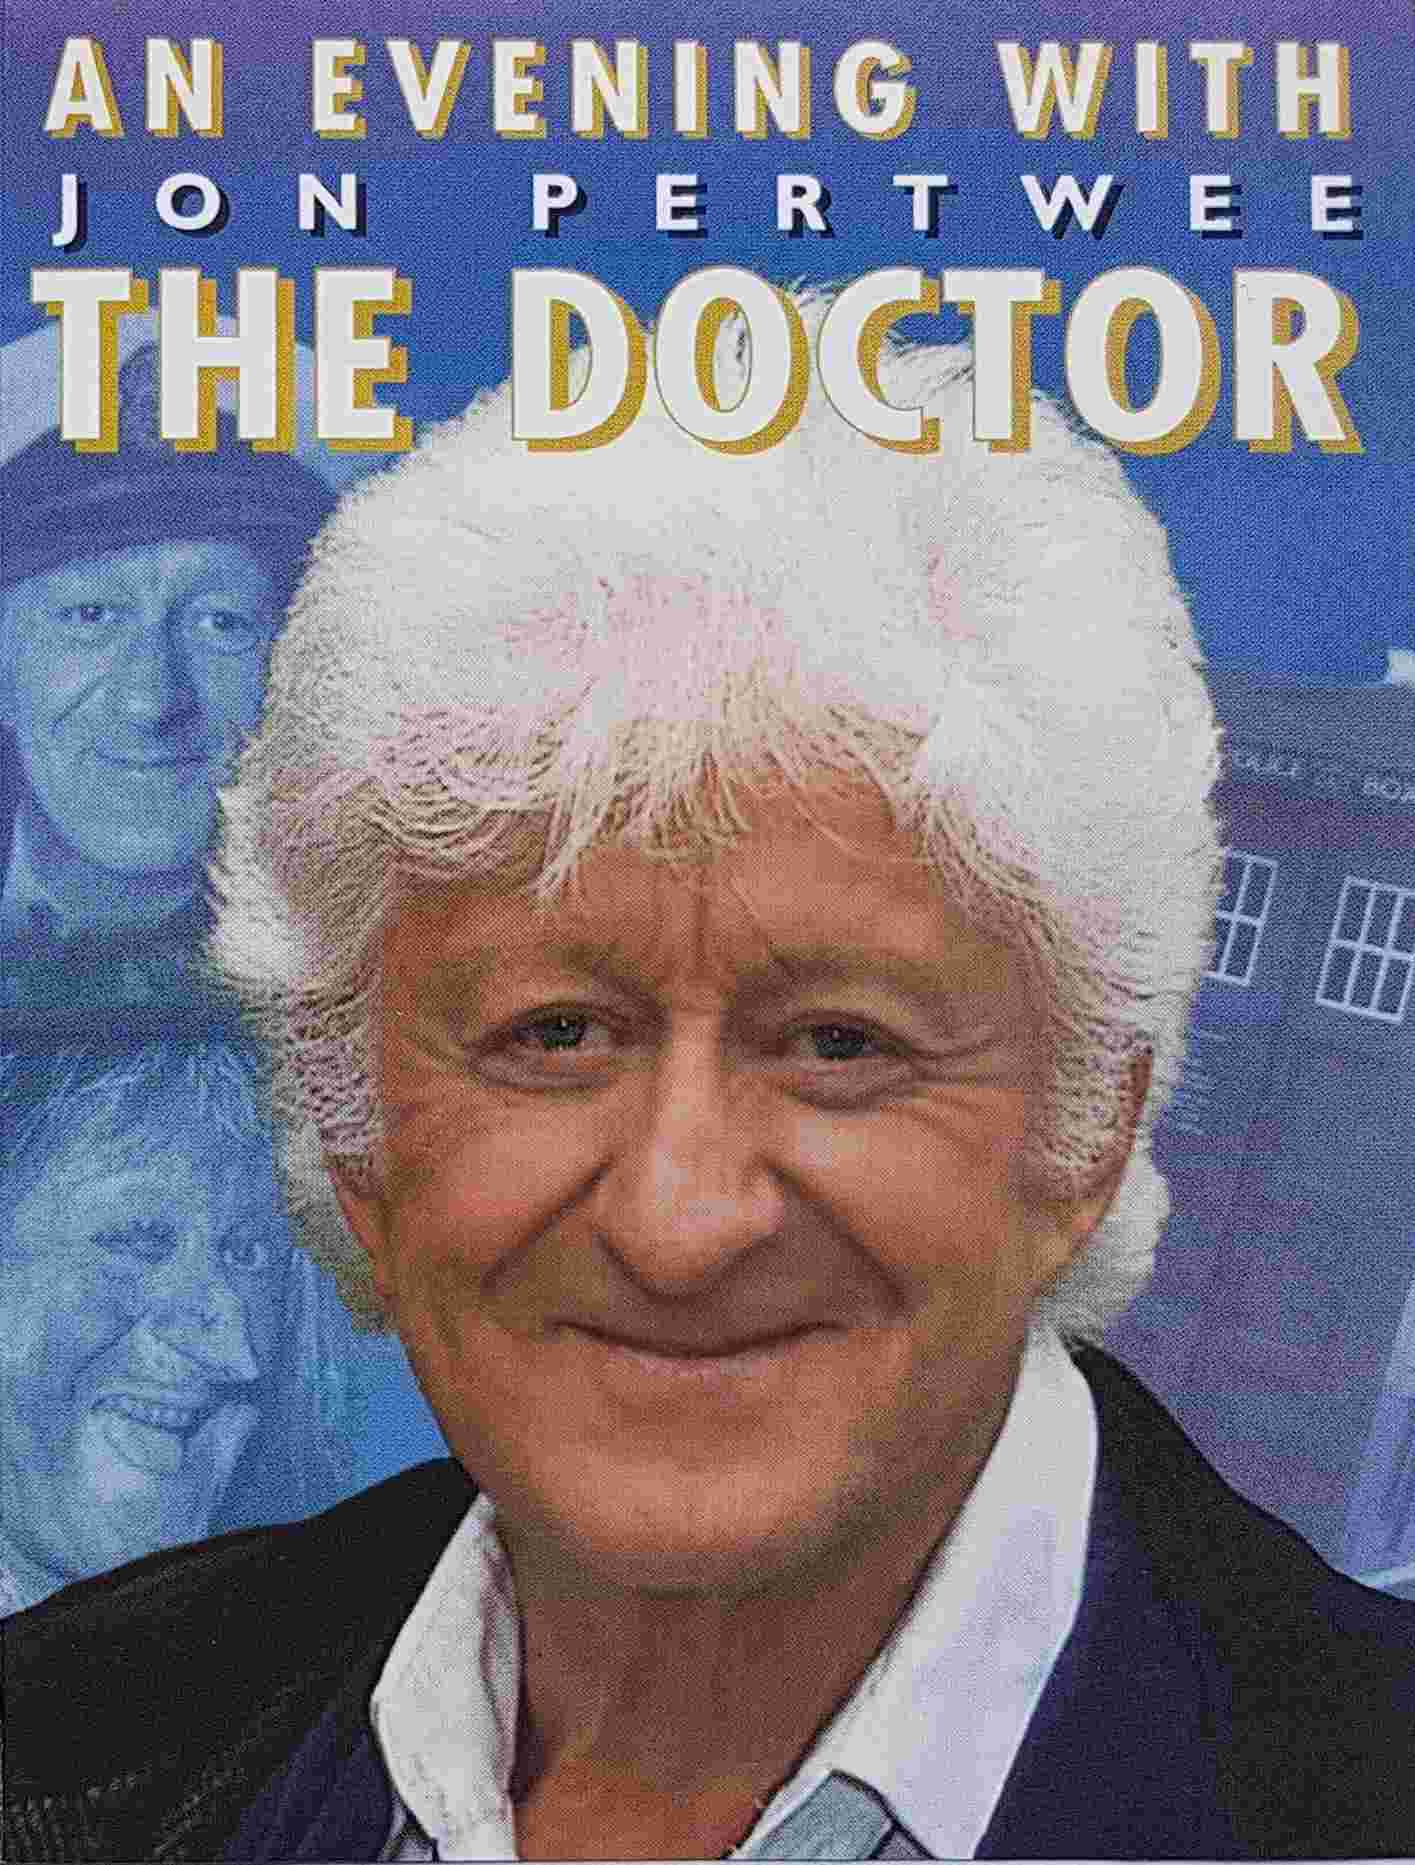 Picture of LFP 7970 An evening with the doctor, a tribute to Jon Pertwee by artist Unknown from the BBC records and Tapes library